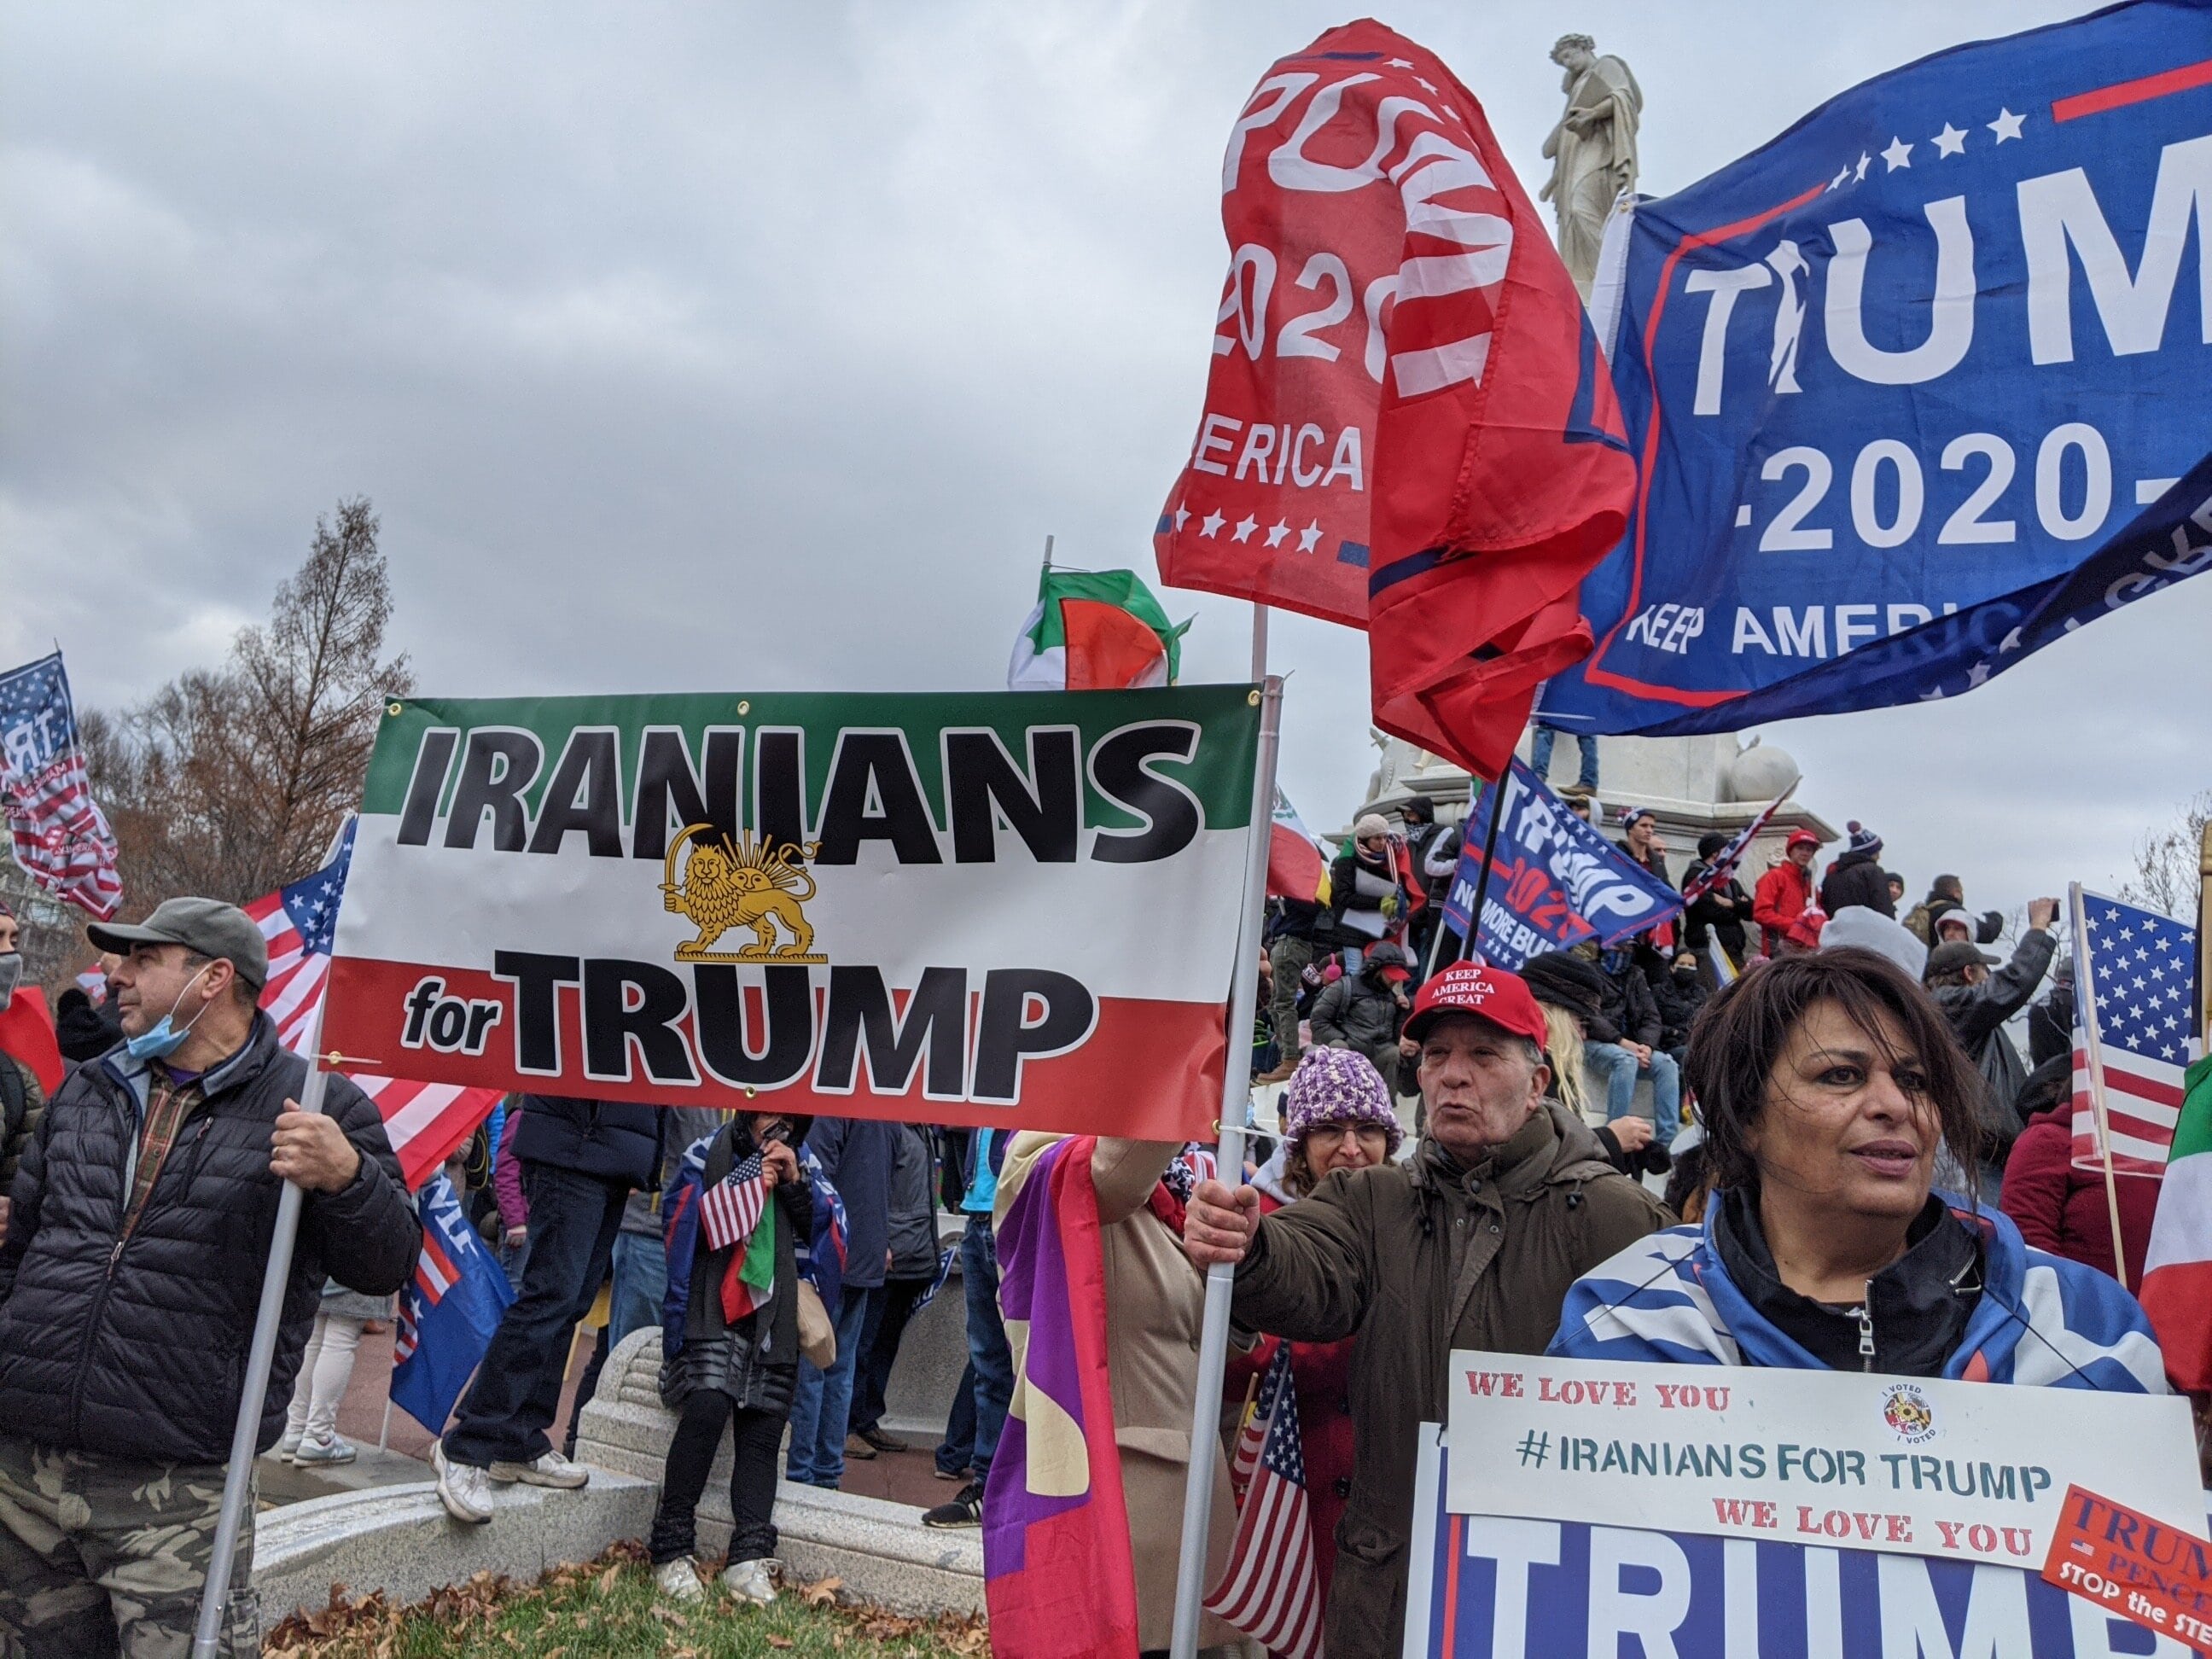 Iranians for Trump banner